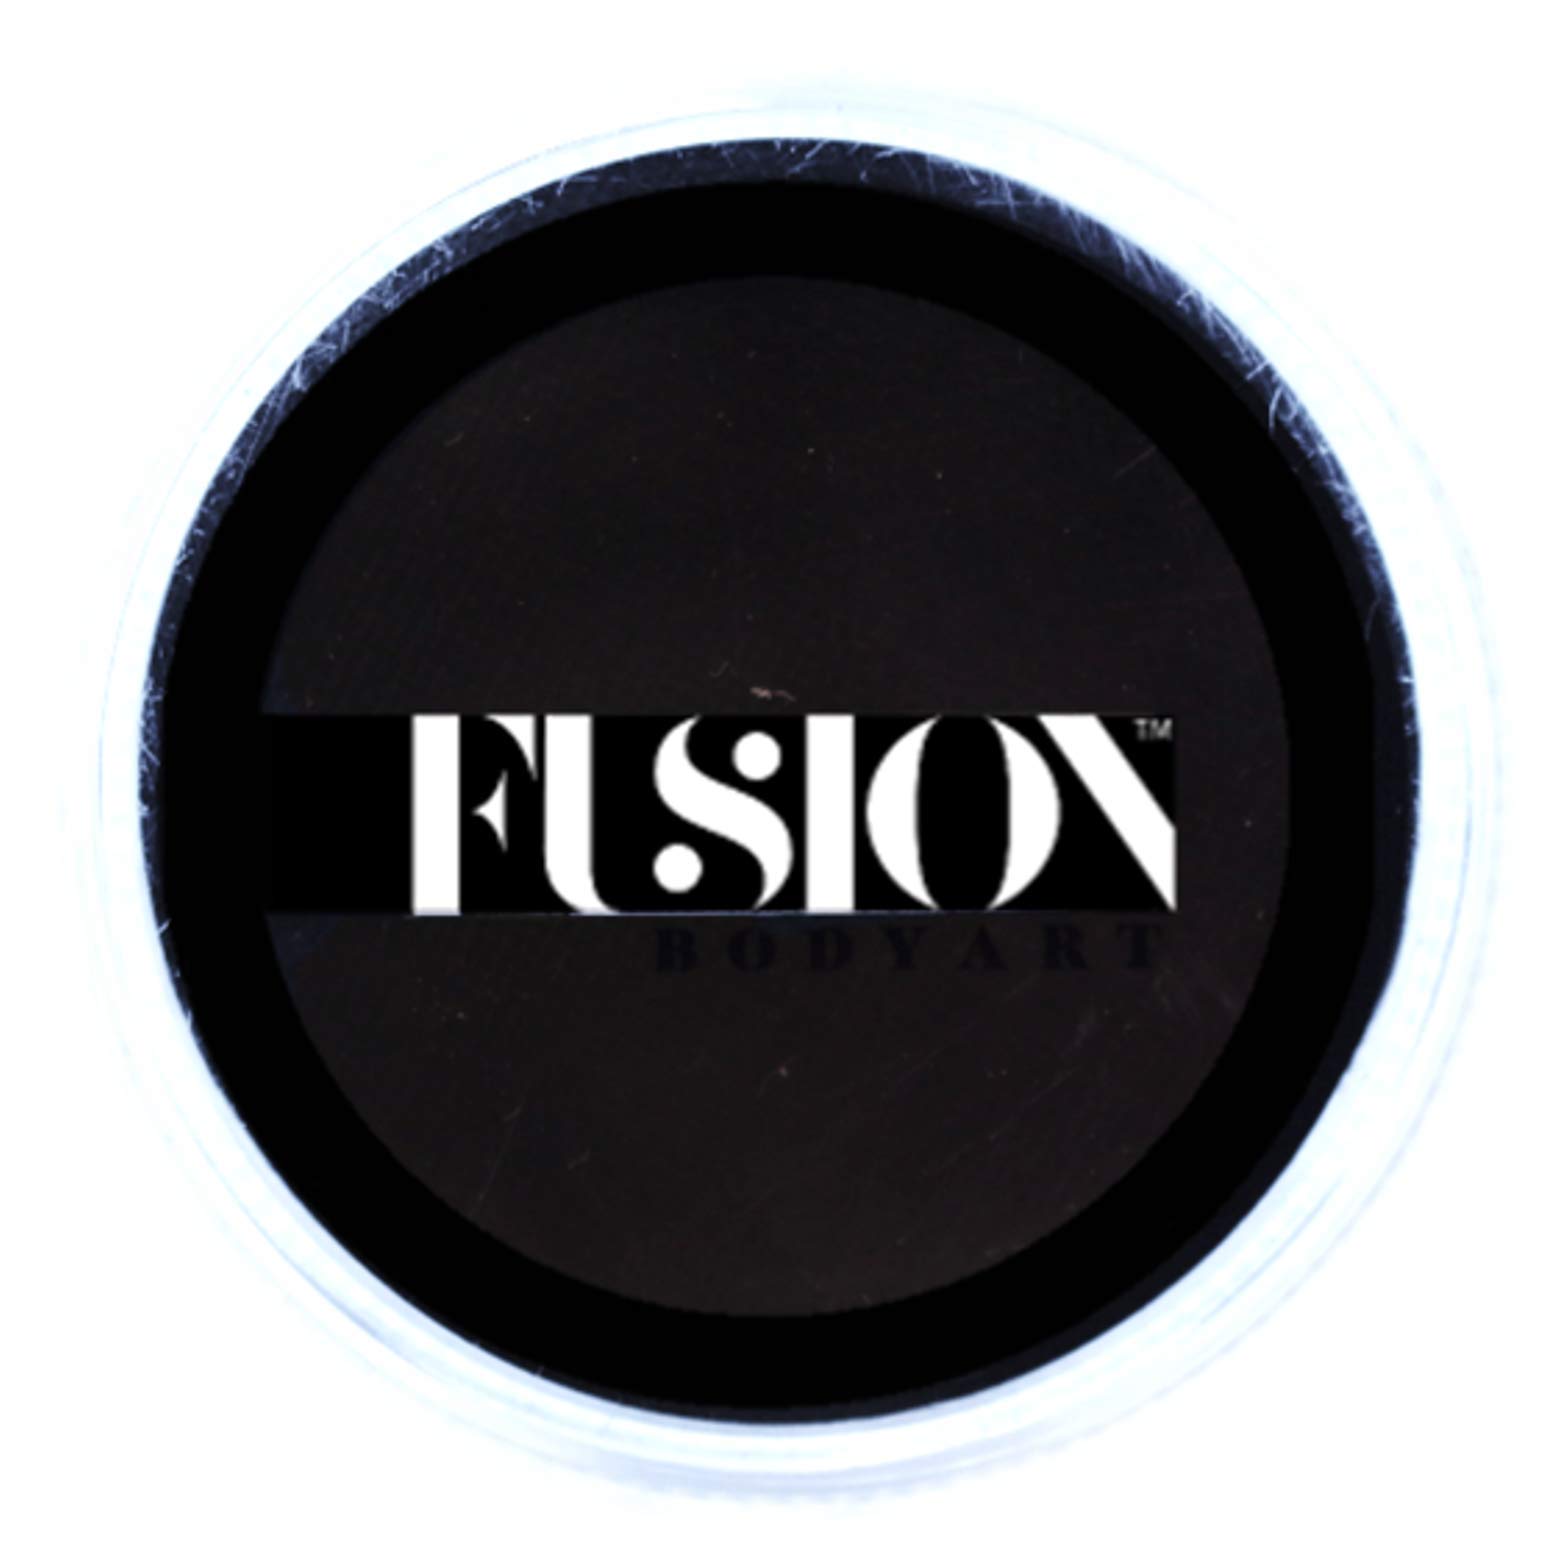 Fusion Body Art Pro Face Paint | Prime Strong Black (32gm), Professional Quality Water Activated Face and Body Paint Supplies Single Makeup Cake Hypoallergenic, Non-Toxic, Safe, Vegan